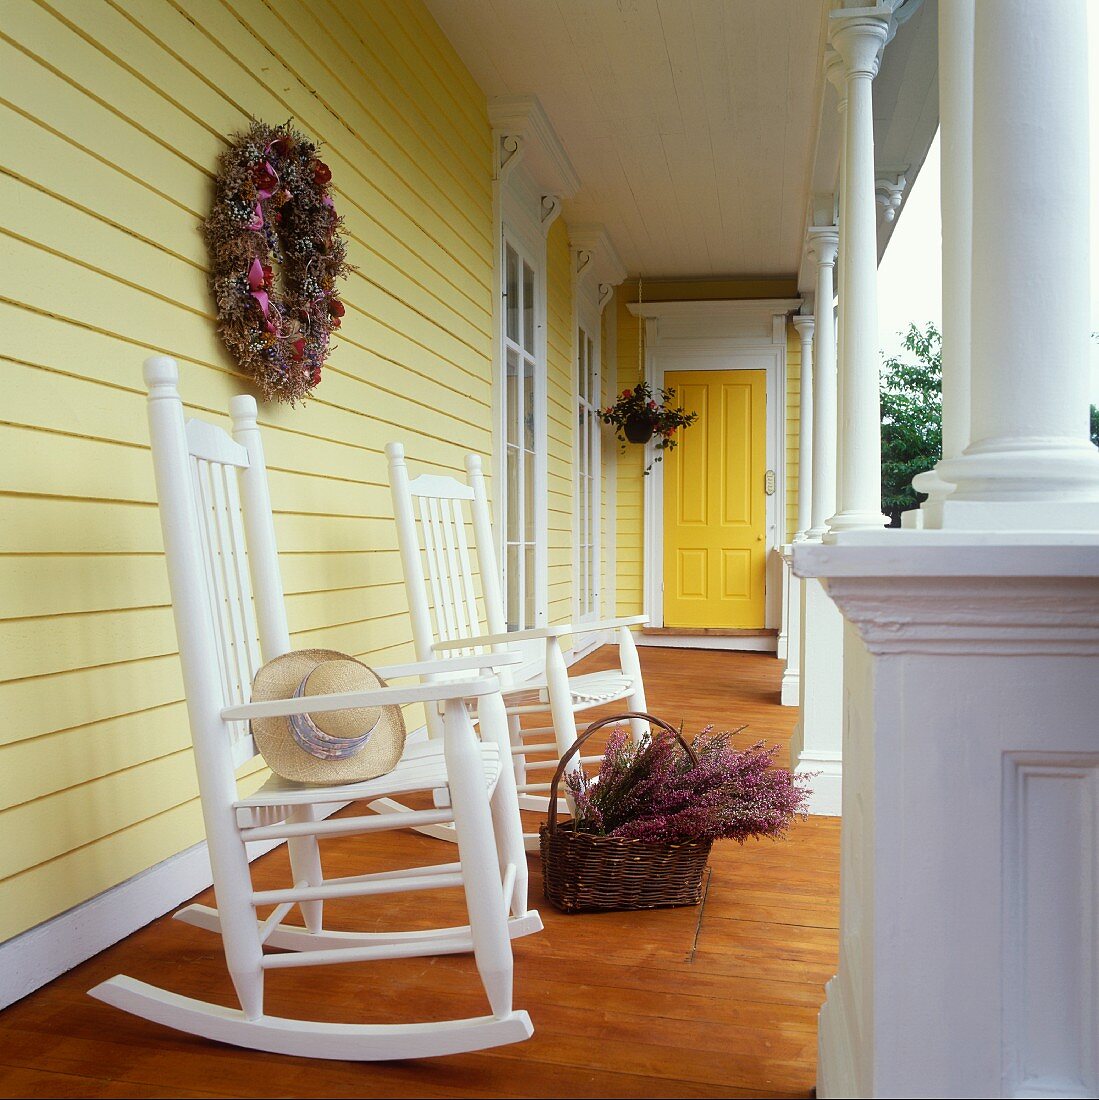 Two rocking chairs and a basket of heather on a yellow-painted veranda